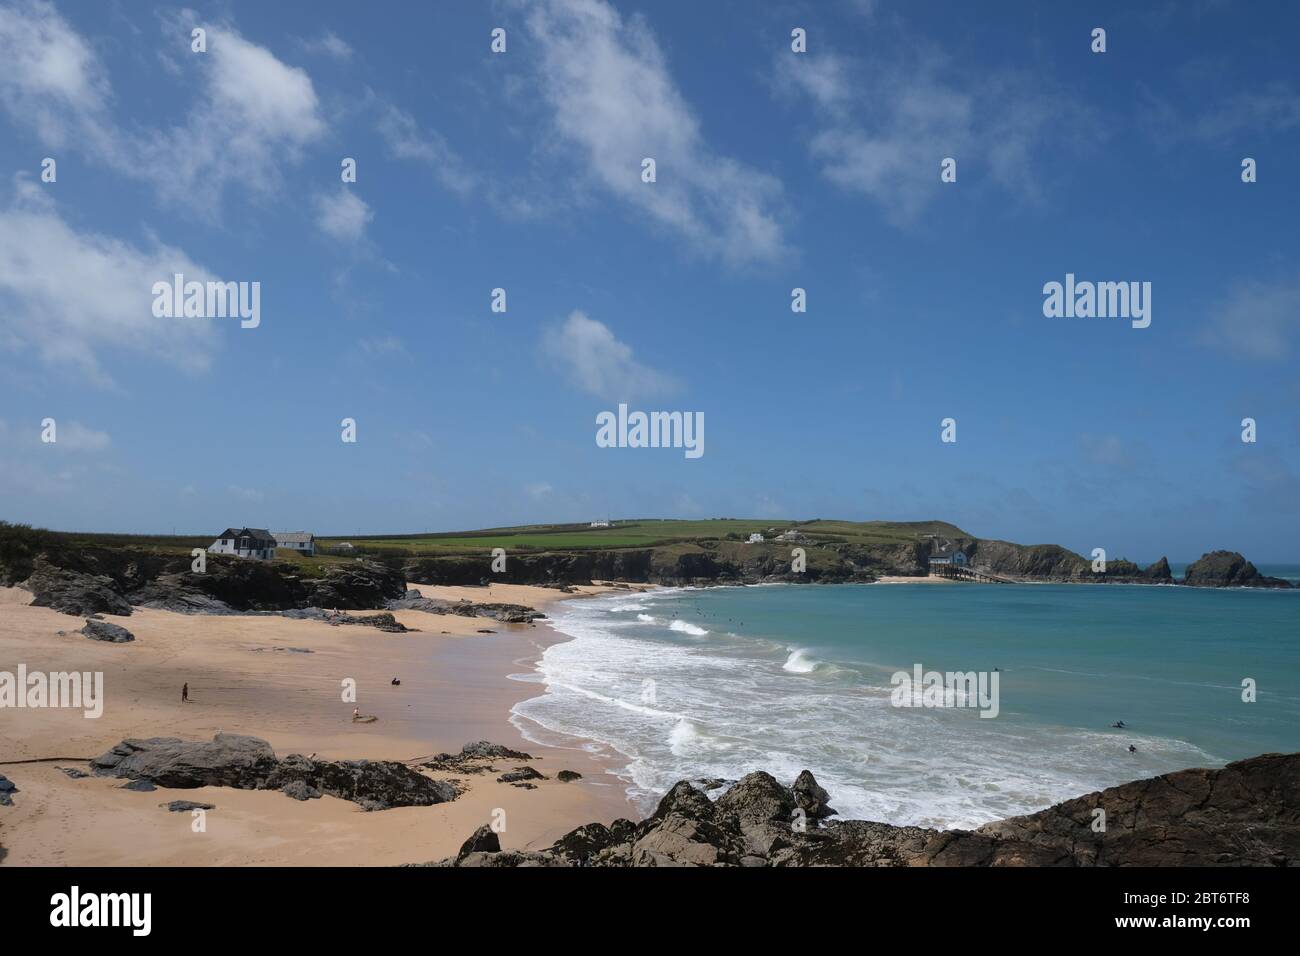 Mother Ivy's Bay, Cornwall, UK. 23rd May 2020. UK Weather. On what would normally be one of the busiest times of the year, the holiday park and beach at Mother Ivy's bay was virtually deserted, as the Corona Virus holliday lockdown continues. Credit CWPIX / Alamy Live News. Stock Photo